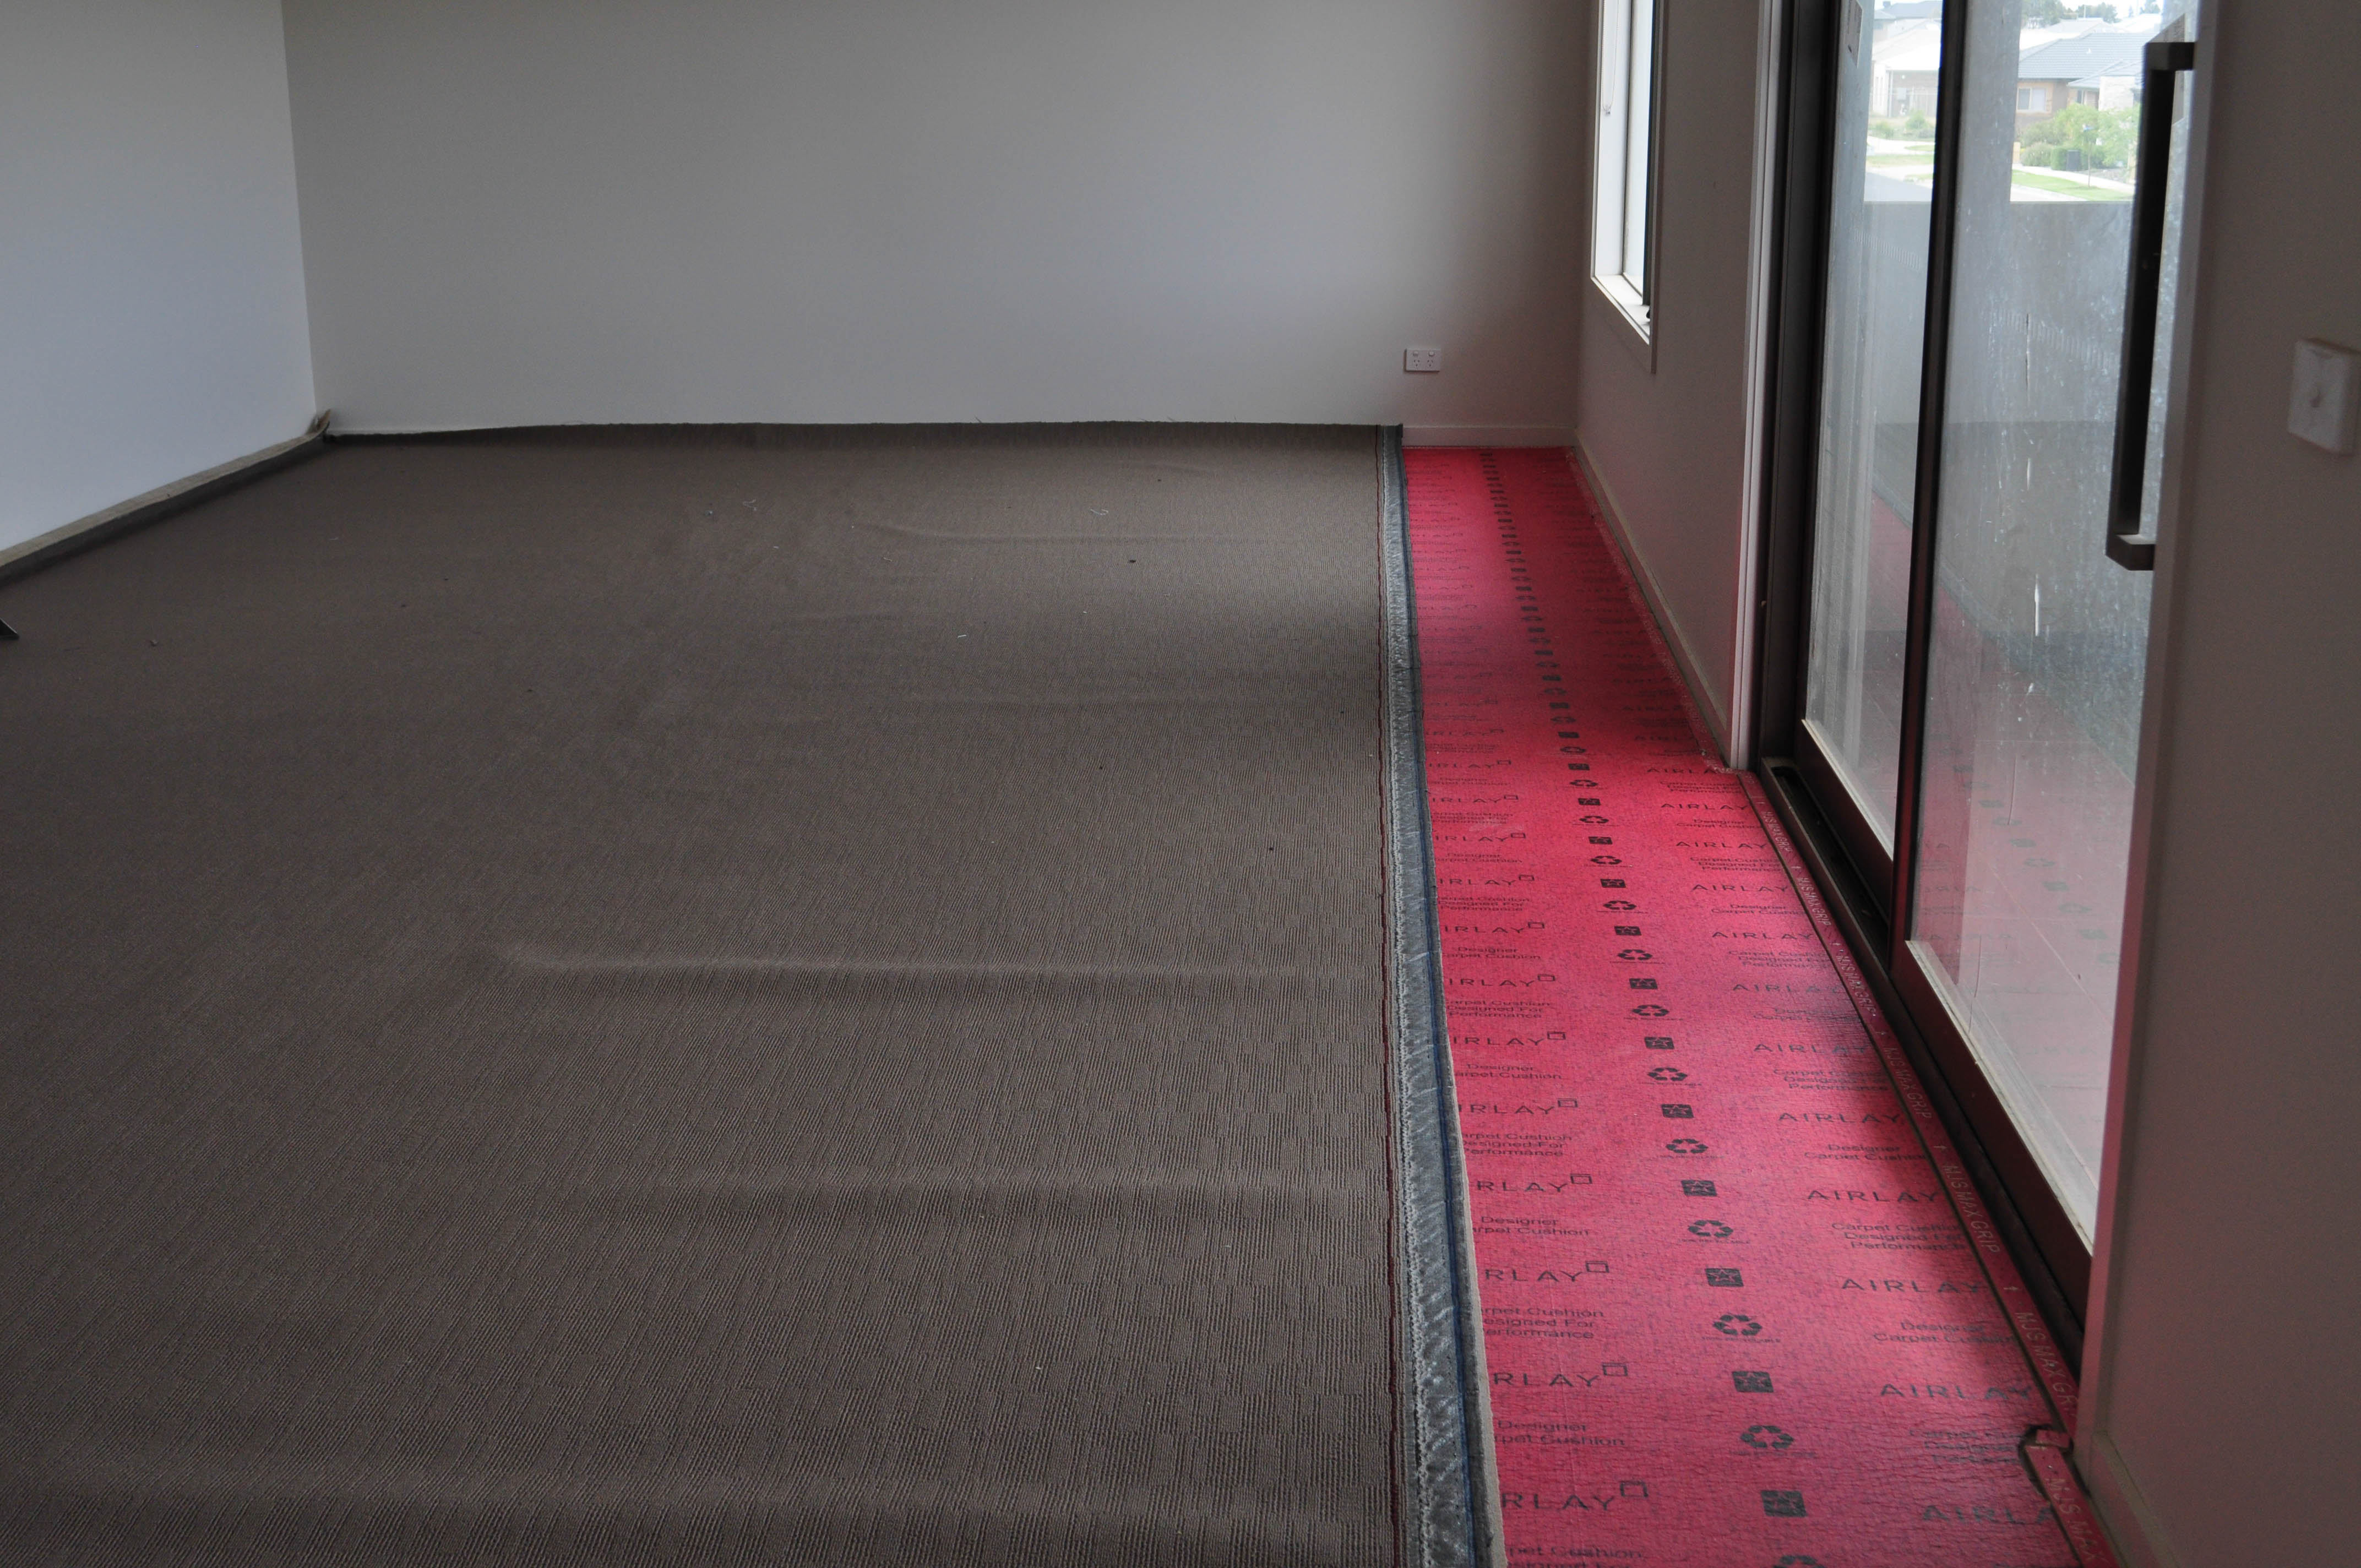 carpet laying process under way by Concord Floors in a home in Werribee, where pattern matching is required, showing a roll of carpet in a room, stretched out, on top of installed red underlay in a home in
 Point Cook, Werribee Vic 3030.